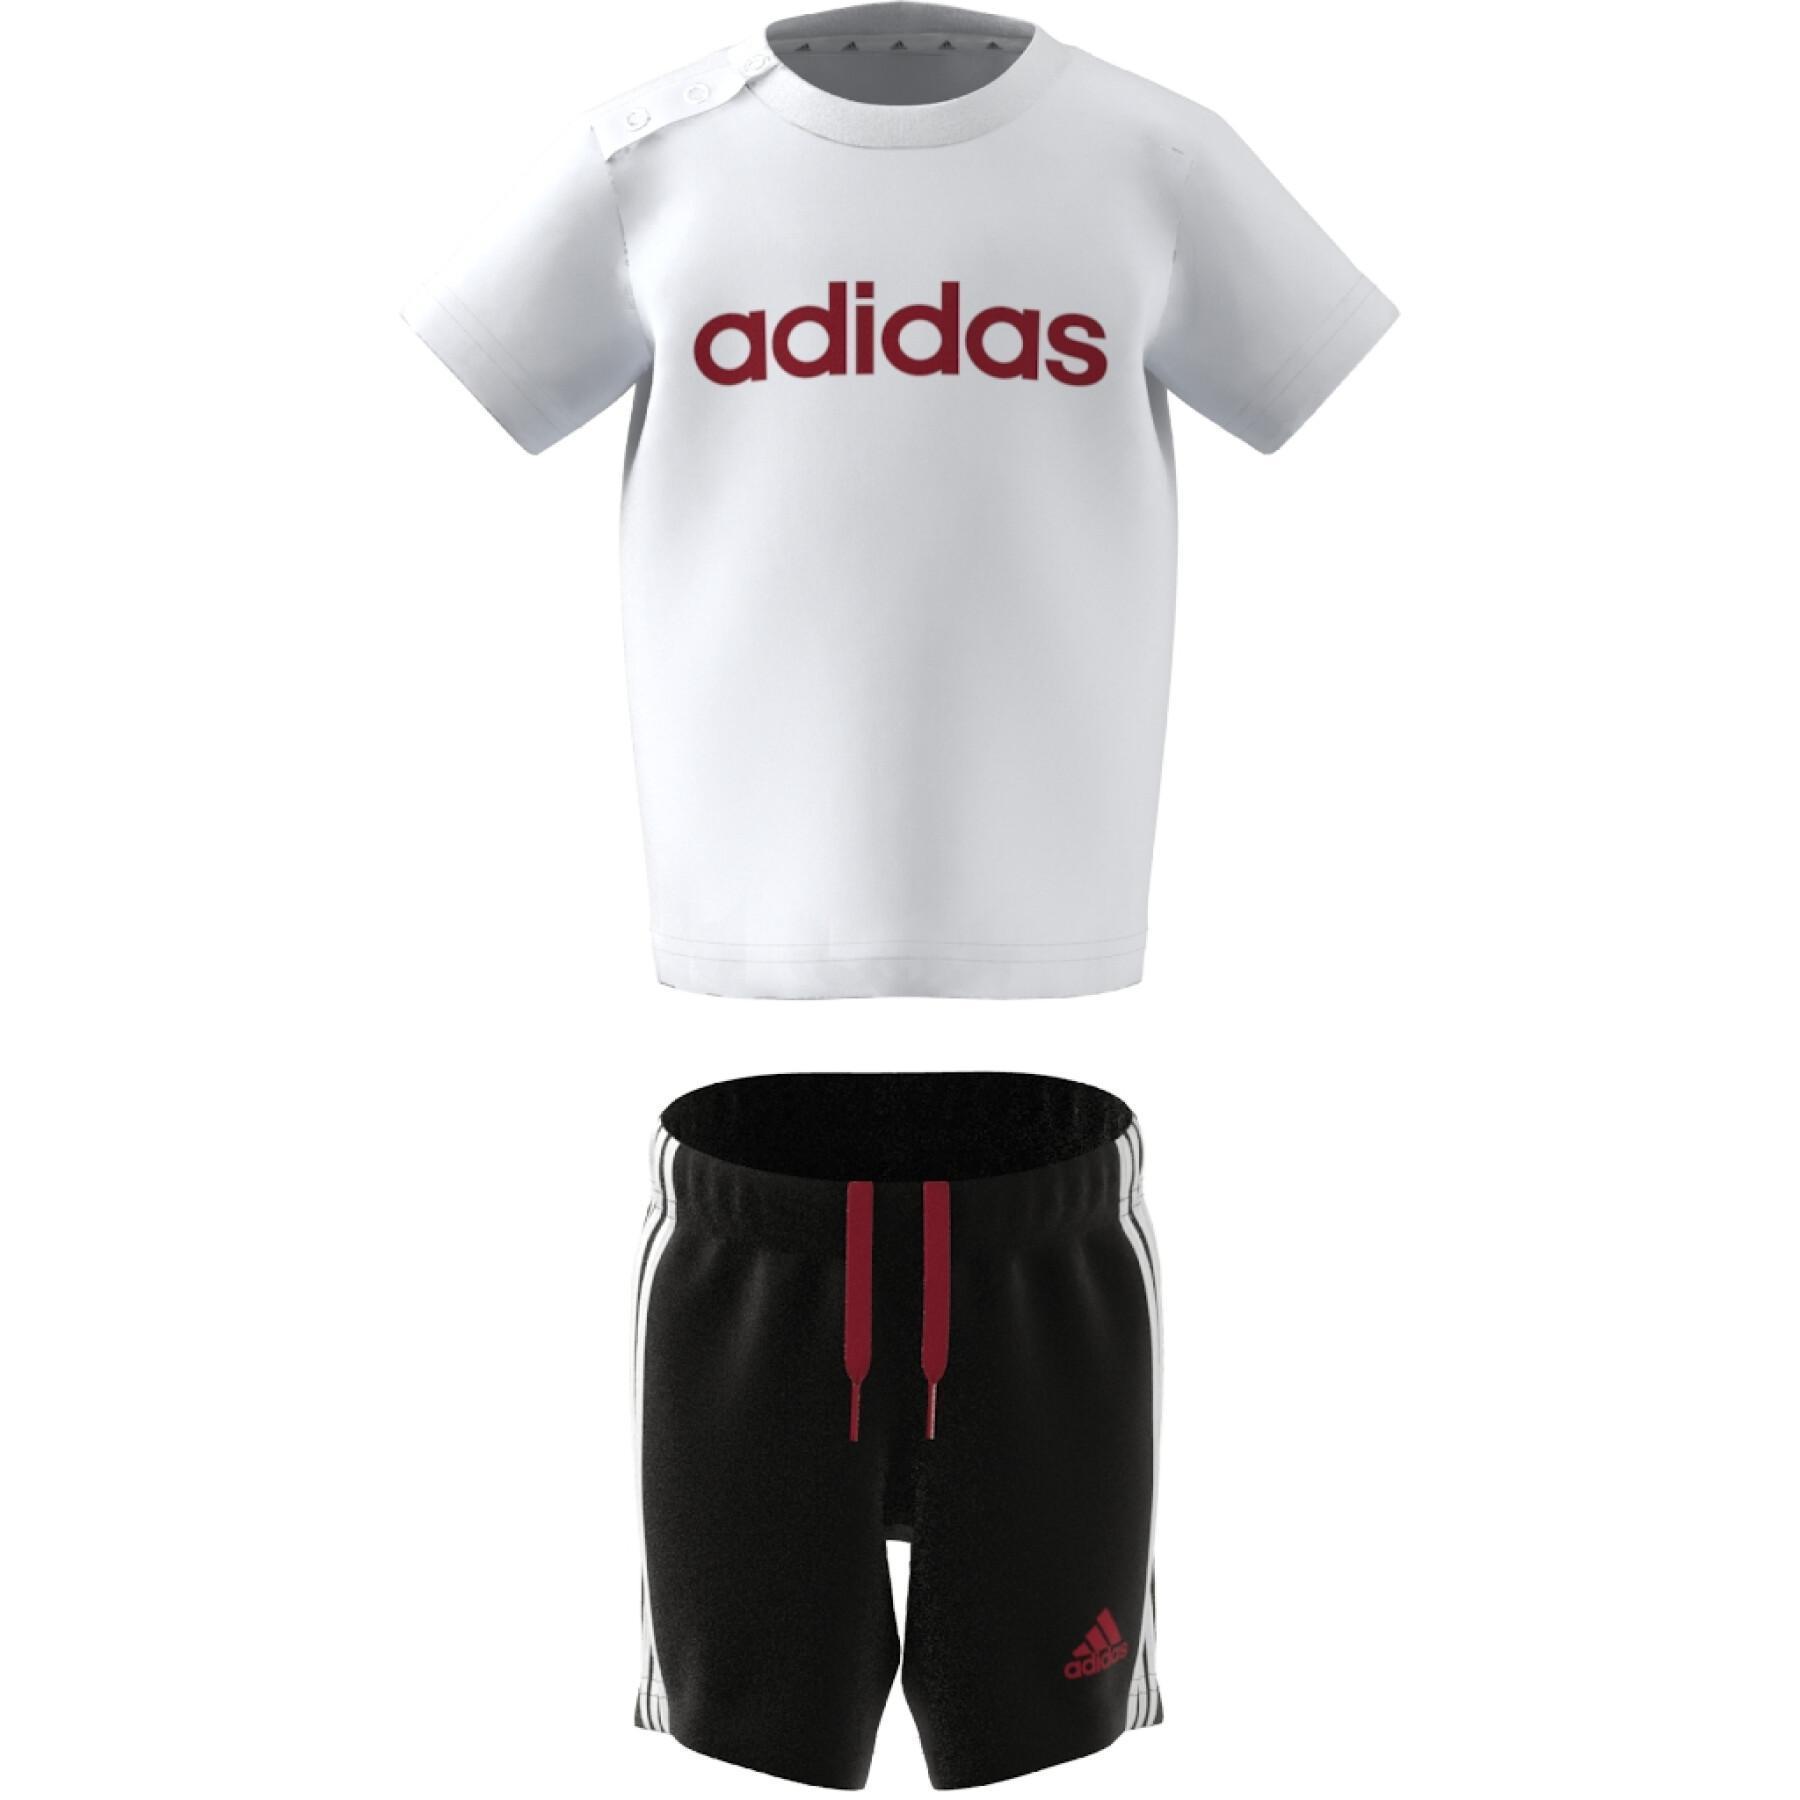 Organic cotton t-shirt and Lifestyle - Brands set adidas shorts - - Essentials adidas 3-Stripes Lineage